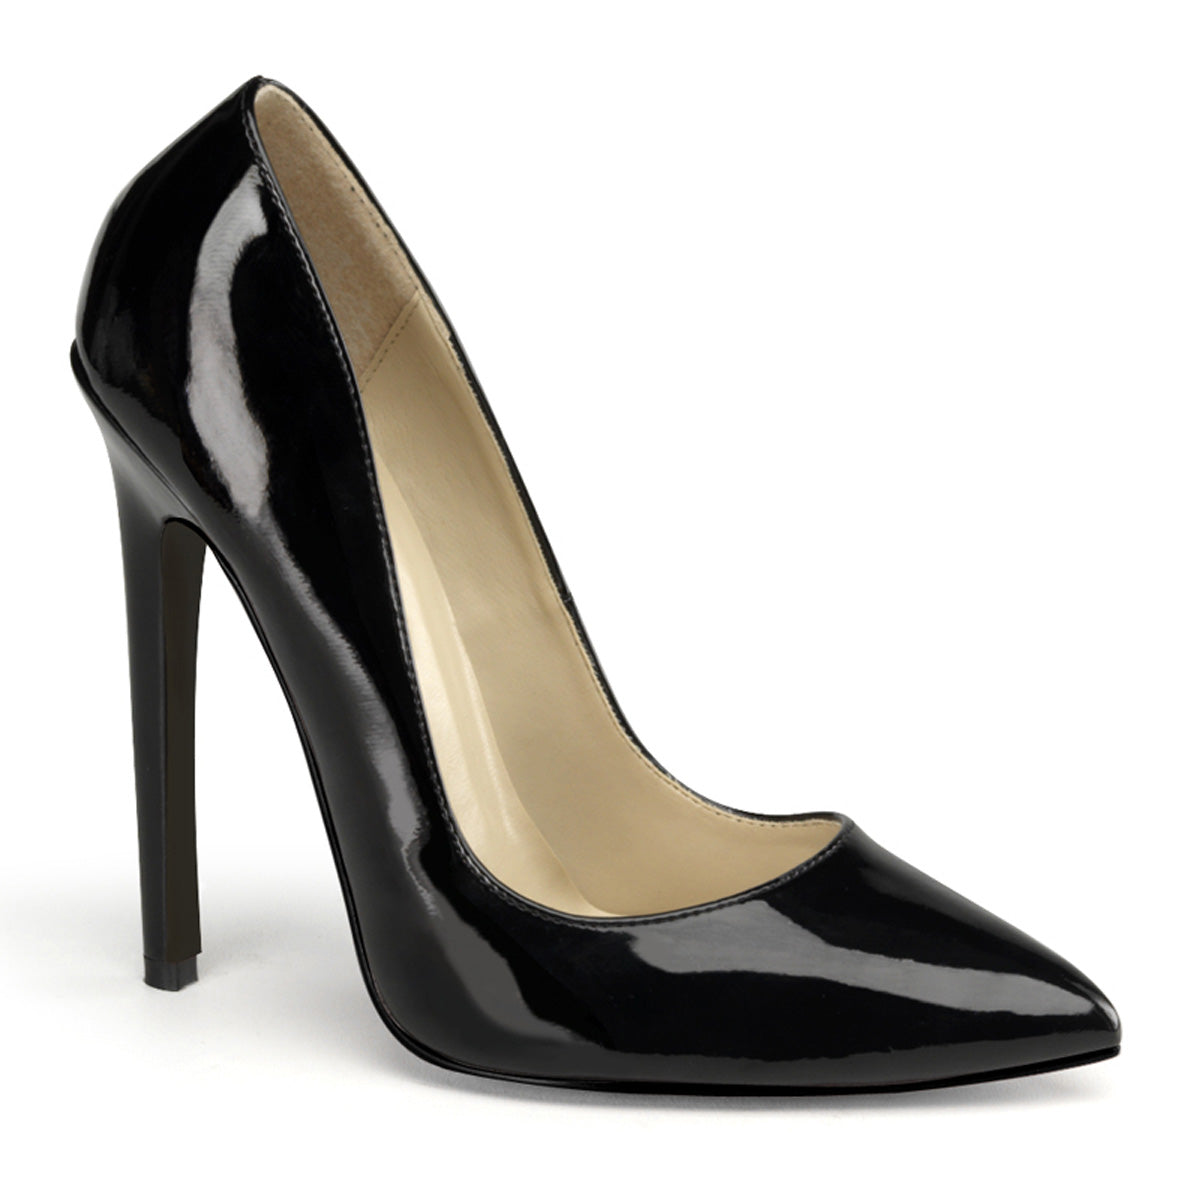 SEXY-20 Pleasers Shoes 5" Heel Black Patent Fetish Footwear